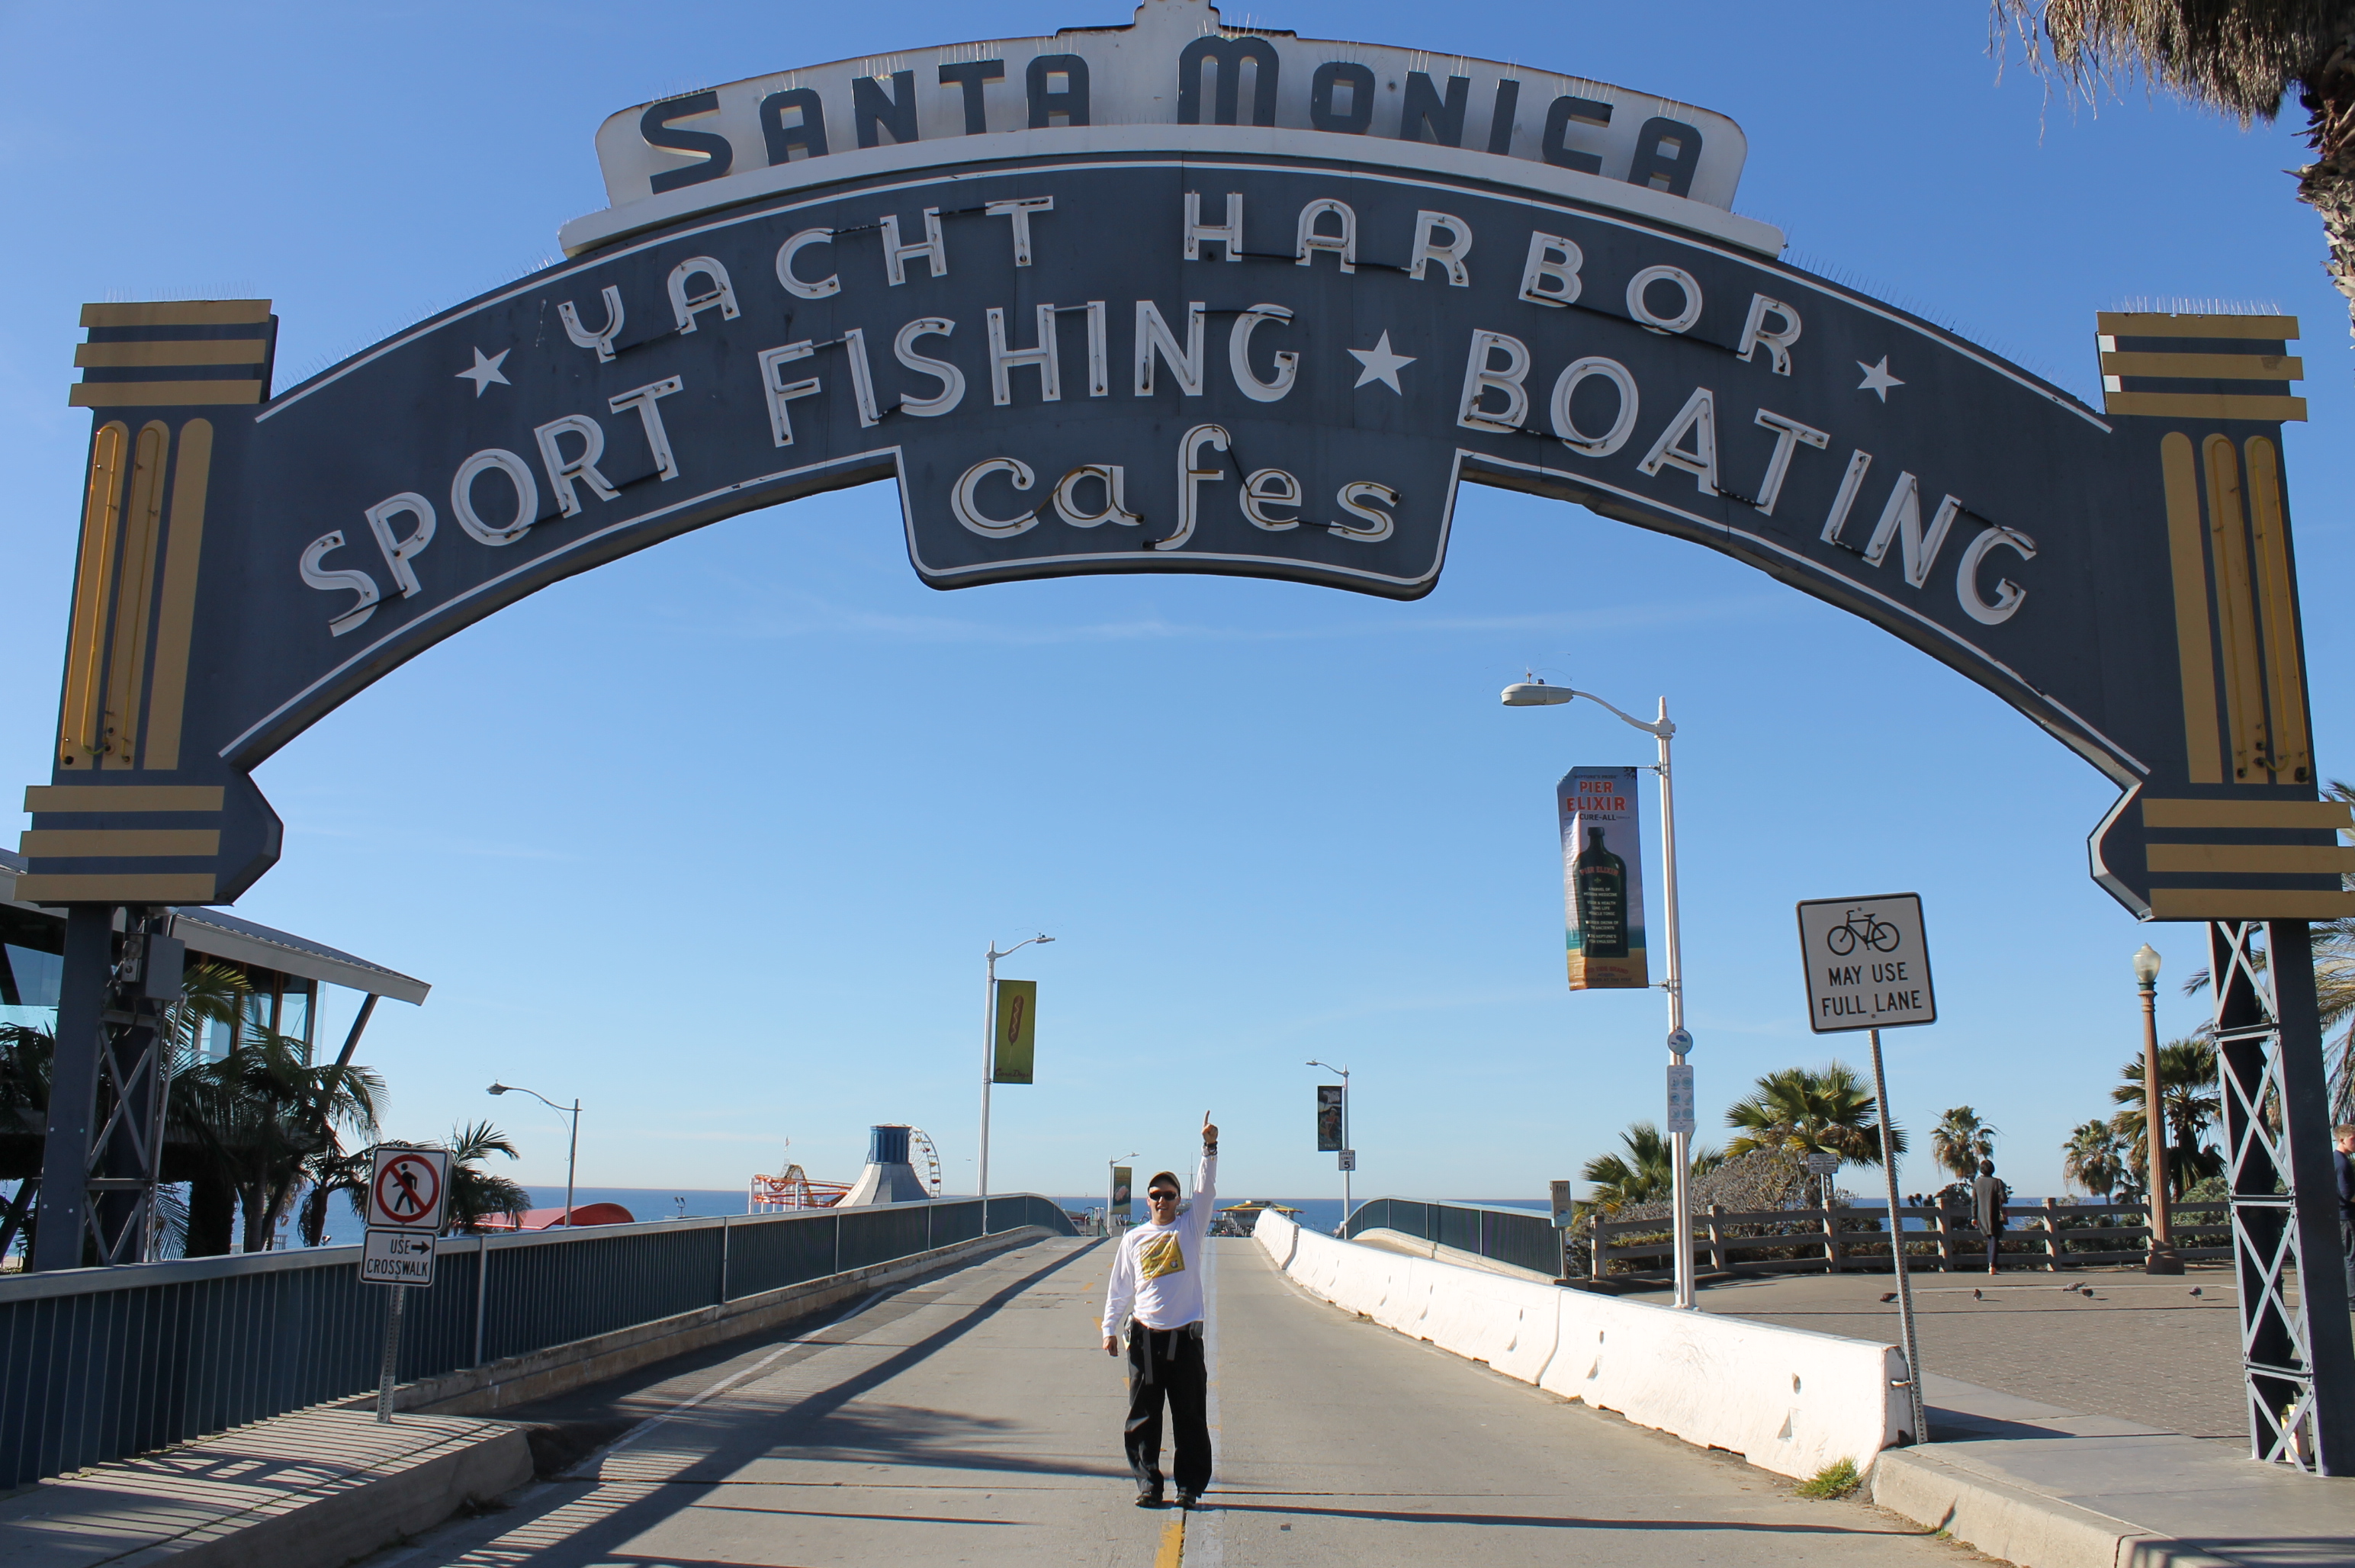 Taylor Lancaster, beginning his walk across the US for GMO Labeling, on 1/5/15 at Santa Monica Pier